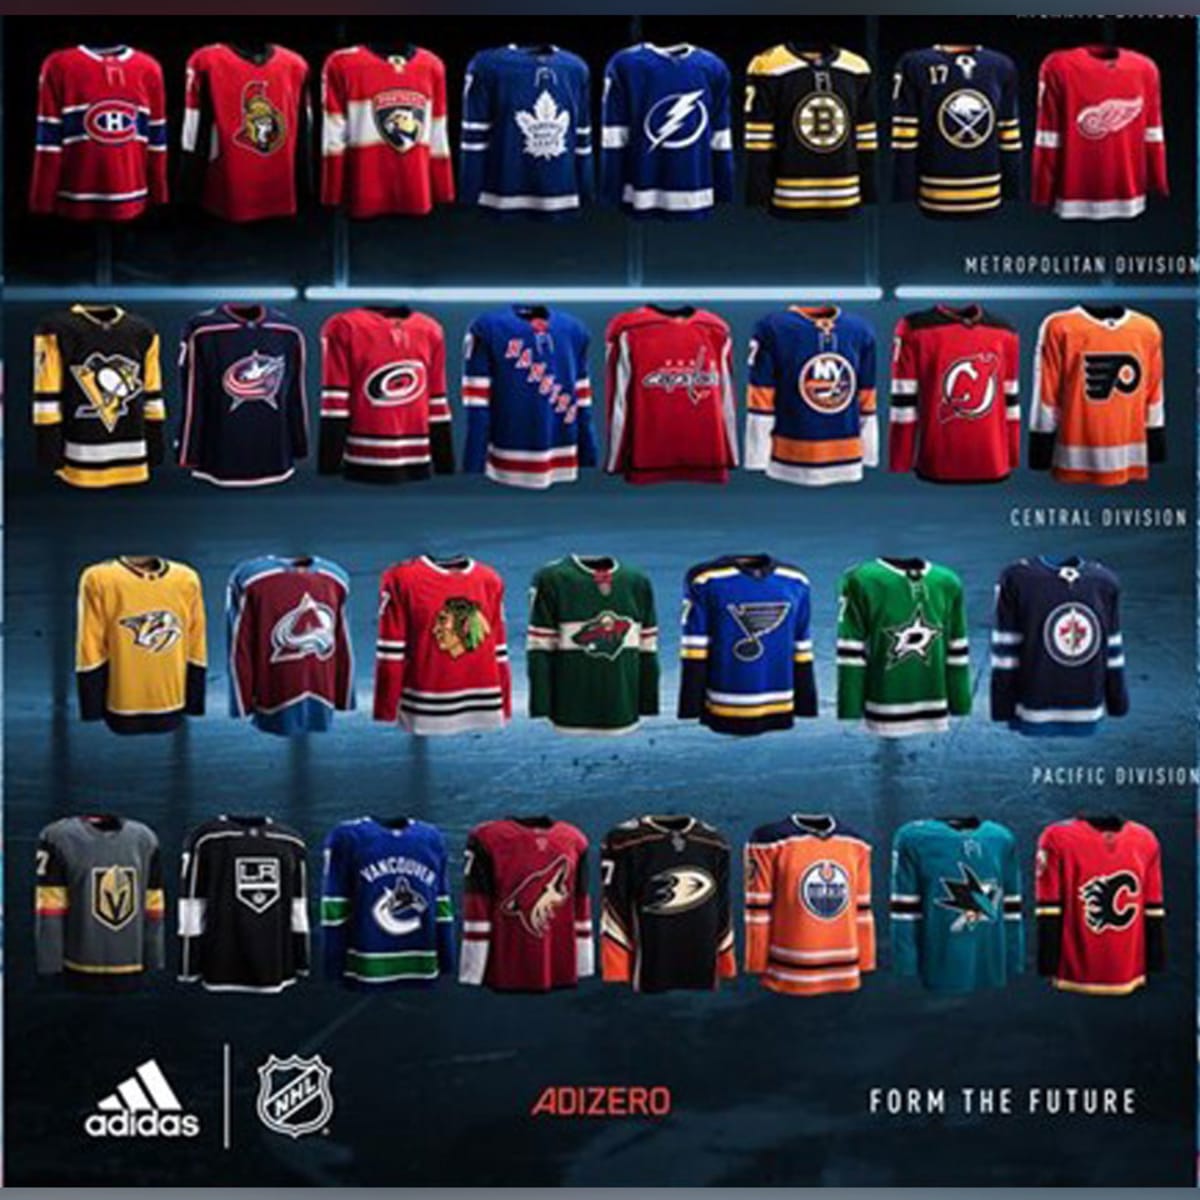 Here Are the New Adidas Uniforms for All 31 NHL Teams